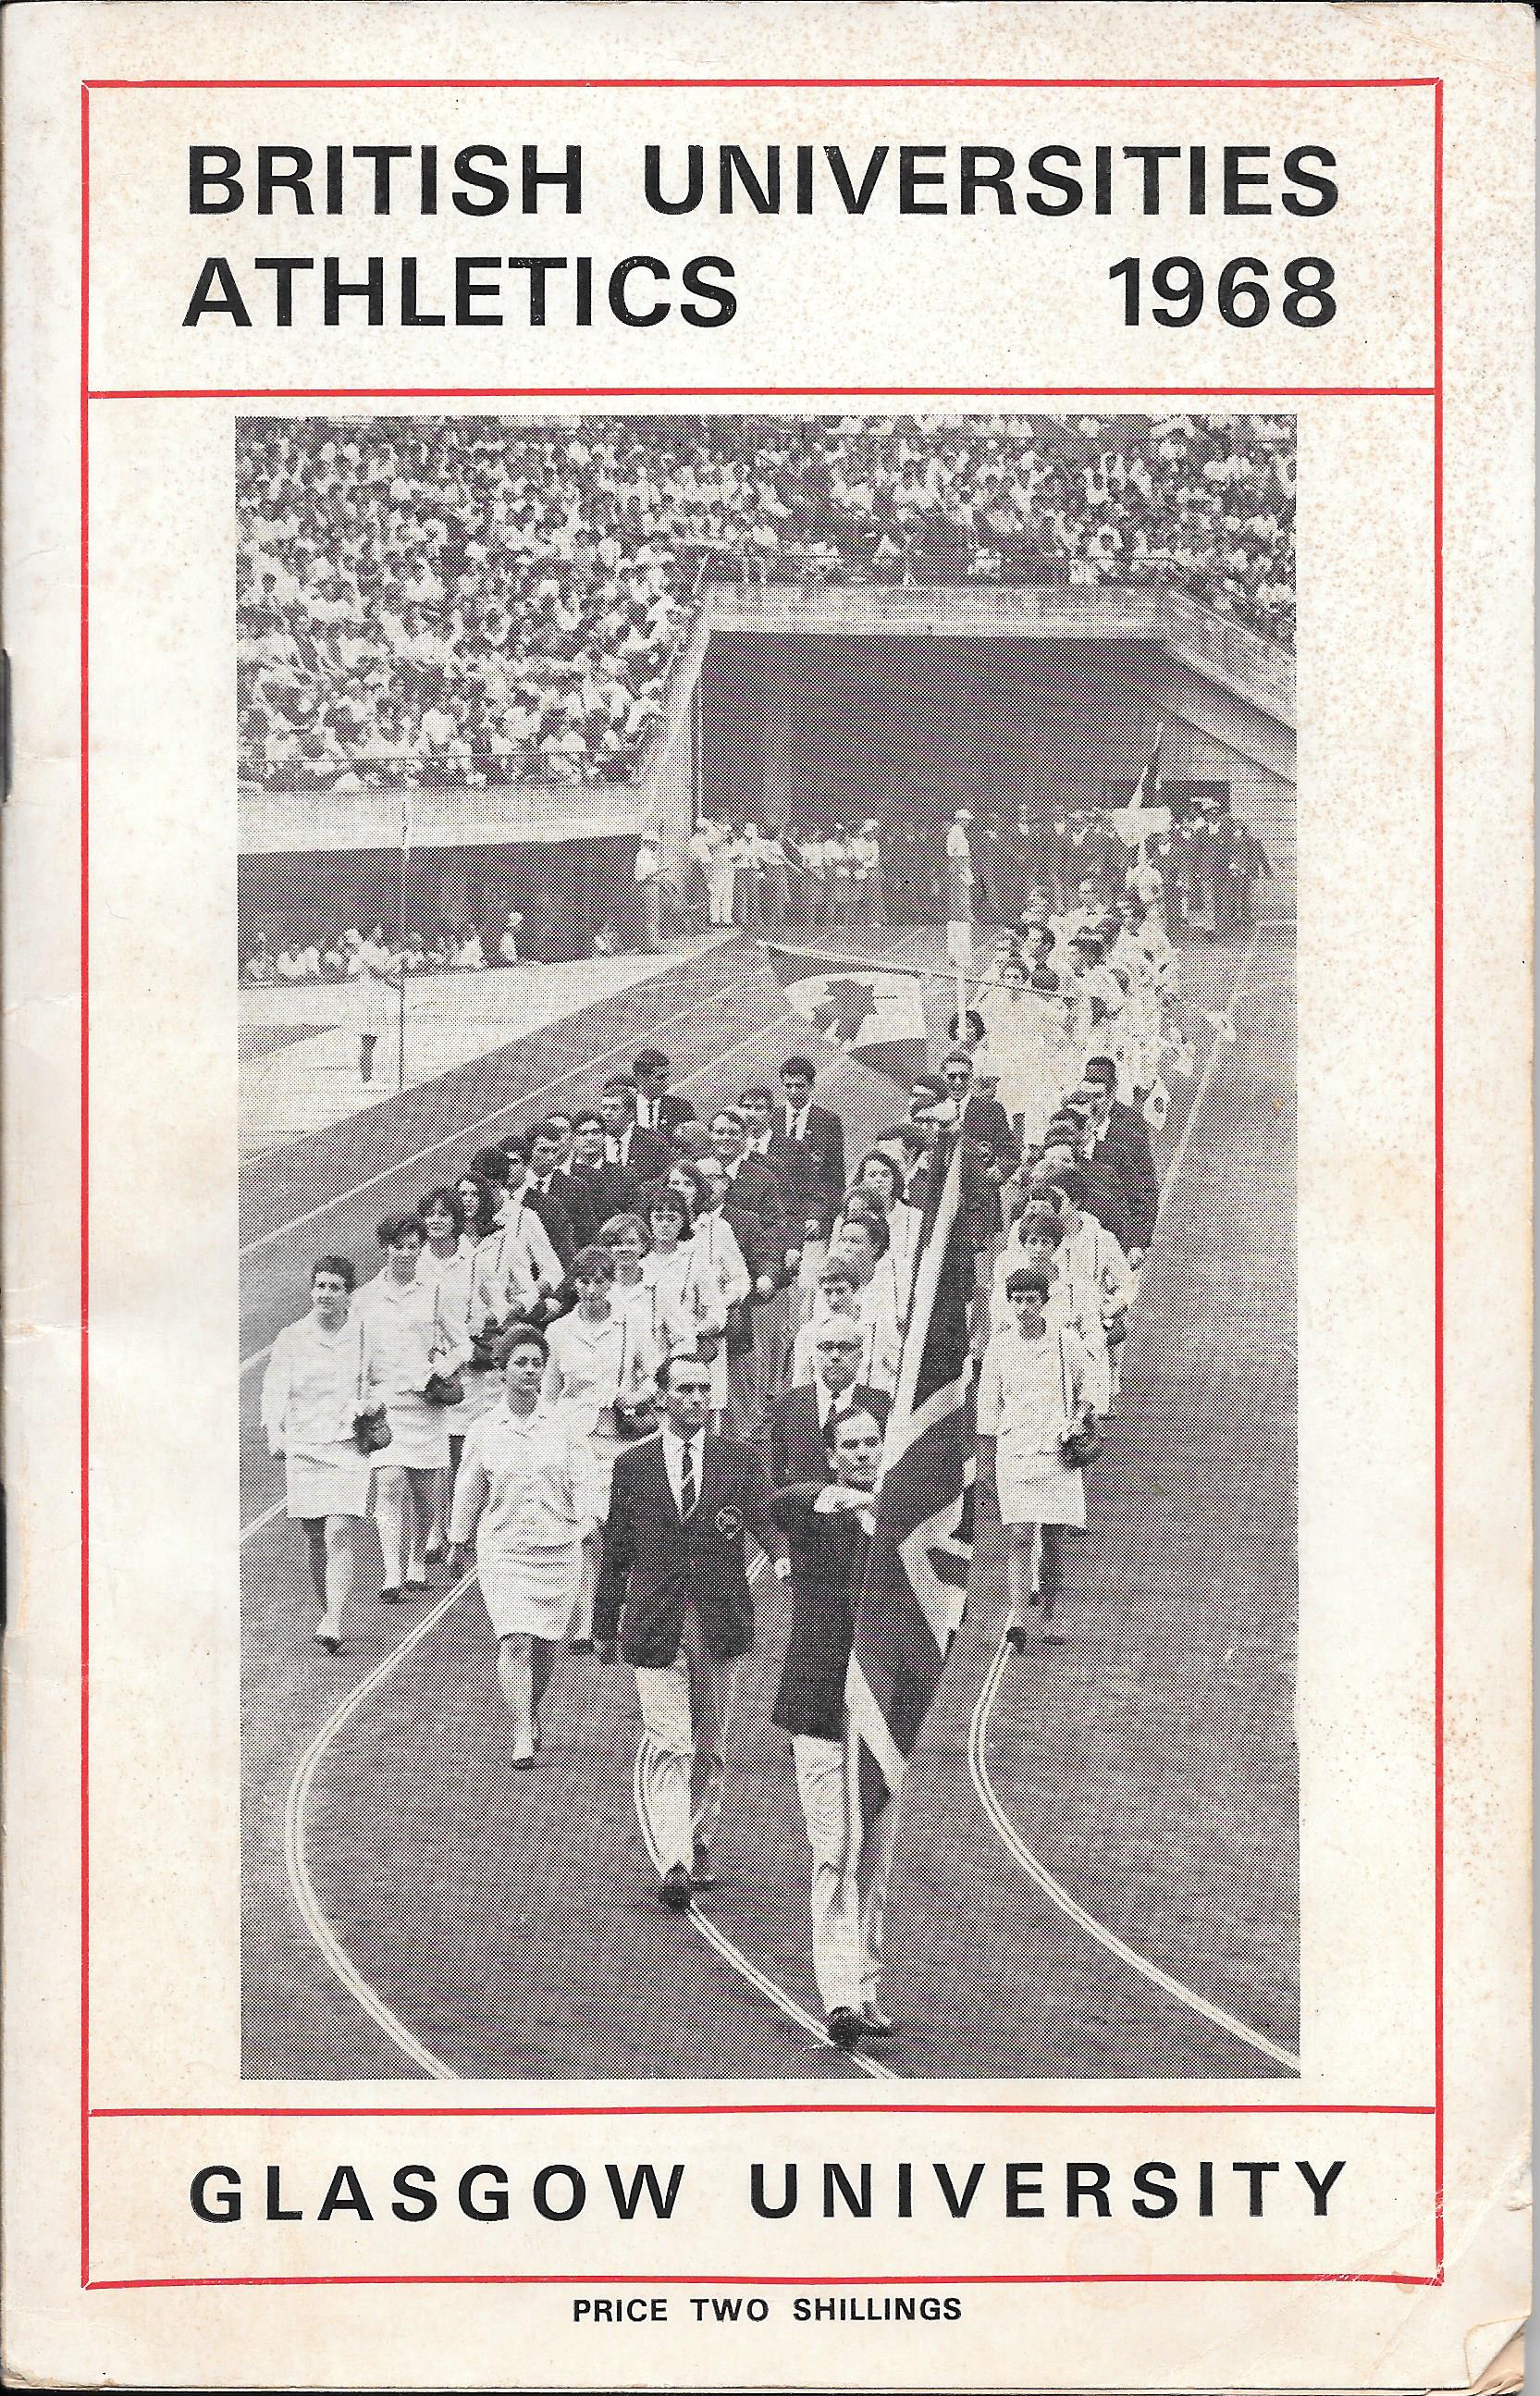 BUSF programme cover from 1968